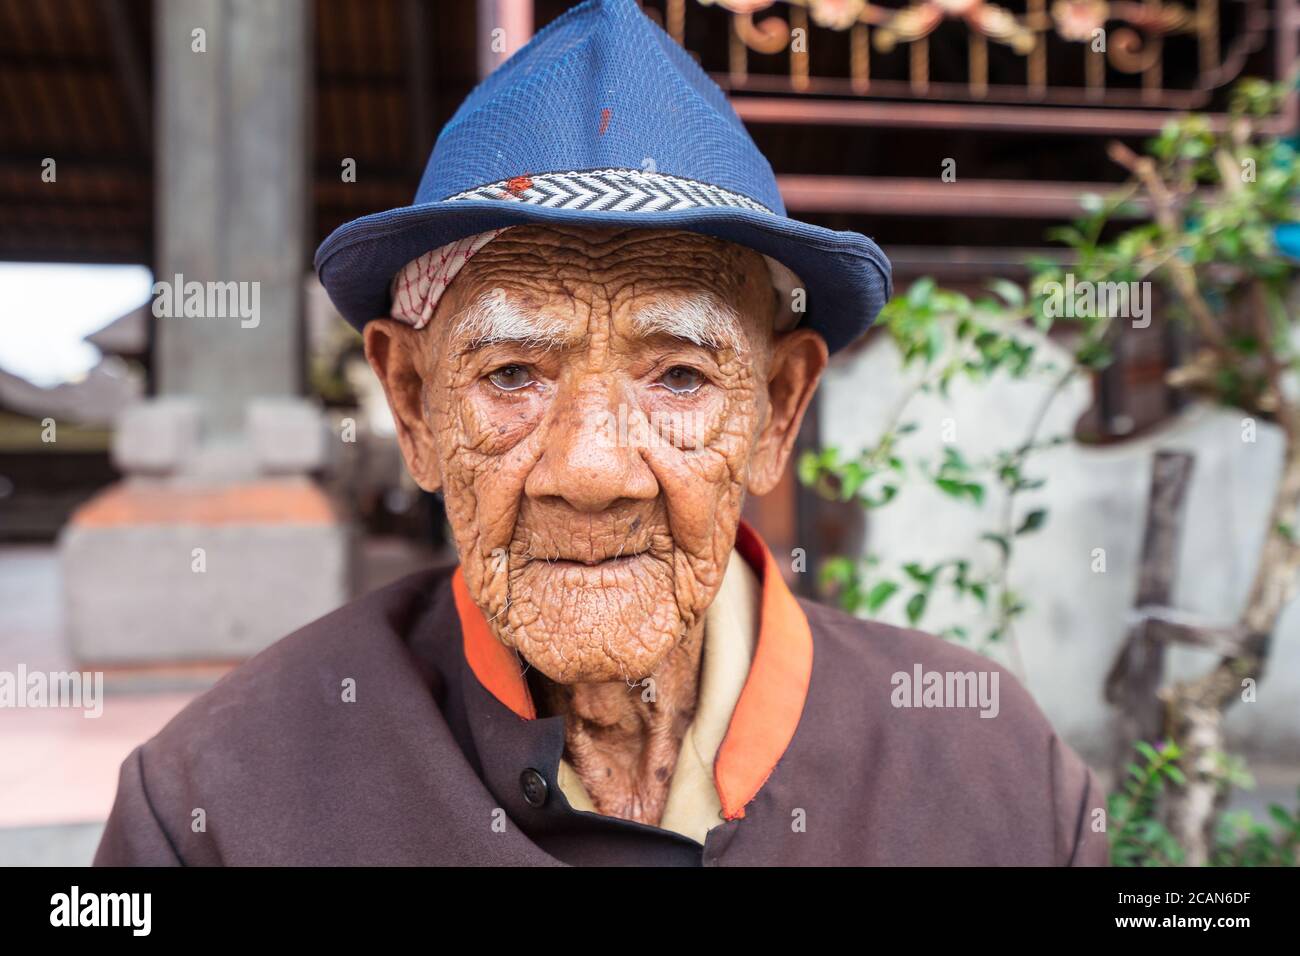 Bali Indonesia August 15 2018 Portrait Of Old Indonesian Man With Hat And White Hair Stock 